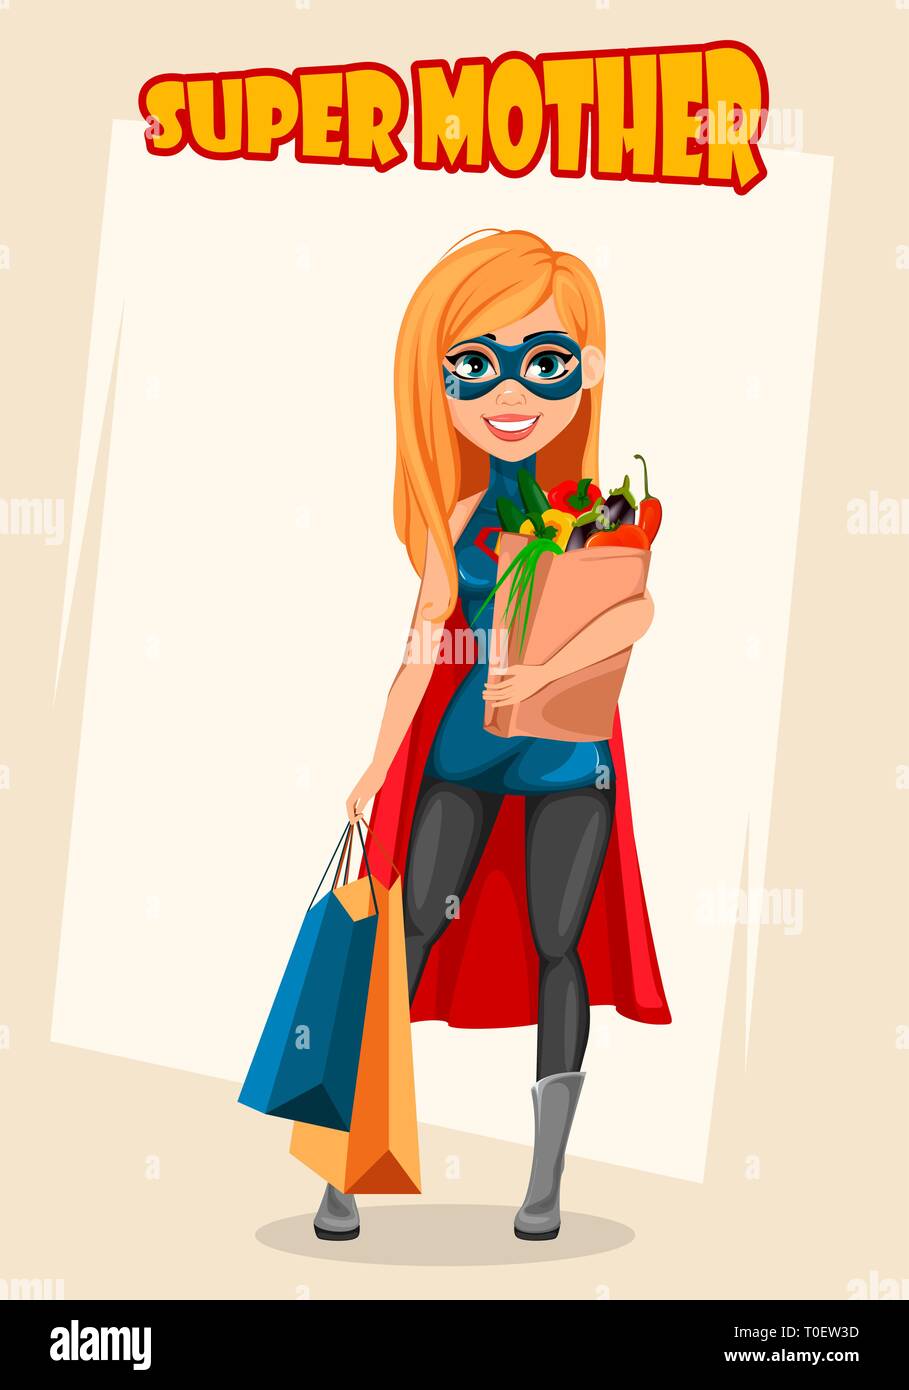 Super mother woman superhero. Concept of woman wearing superhero costume. Cartoon character holding shopping bags. Vector illustration Stock Vector